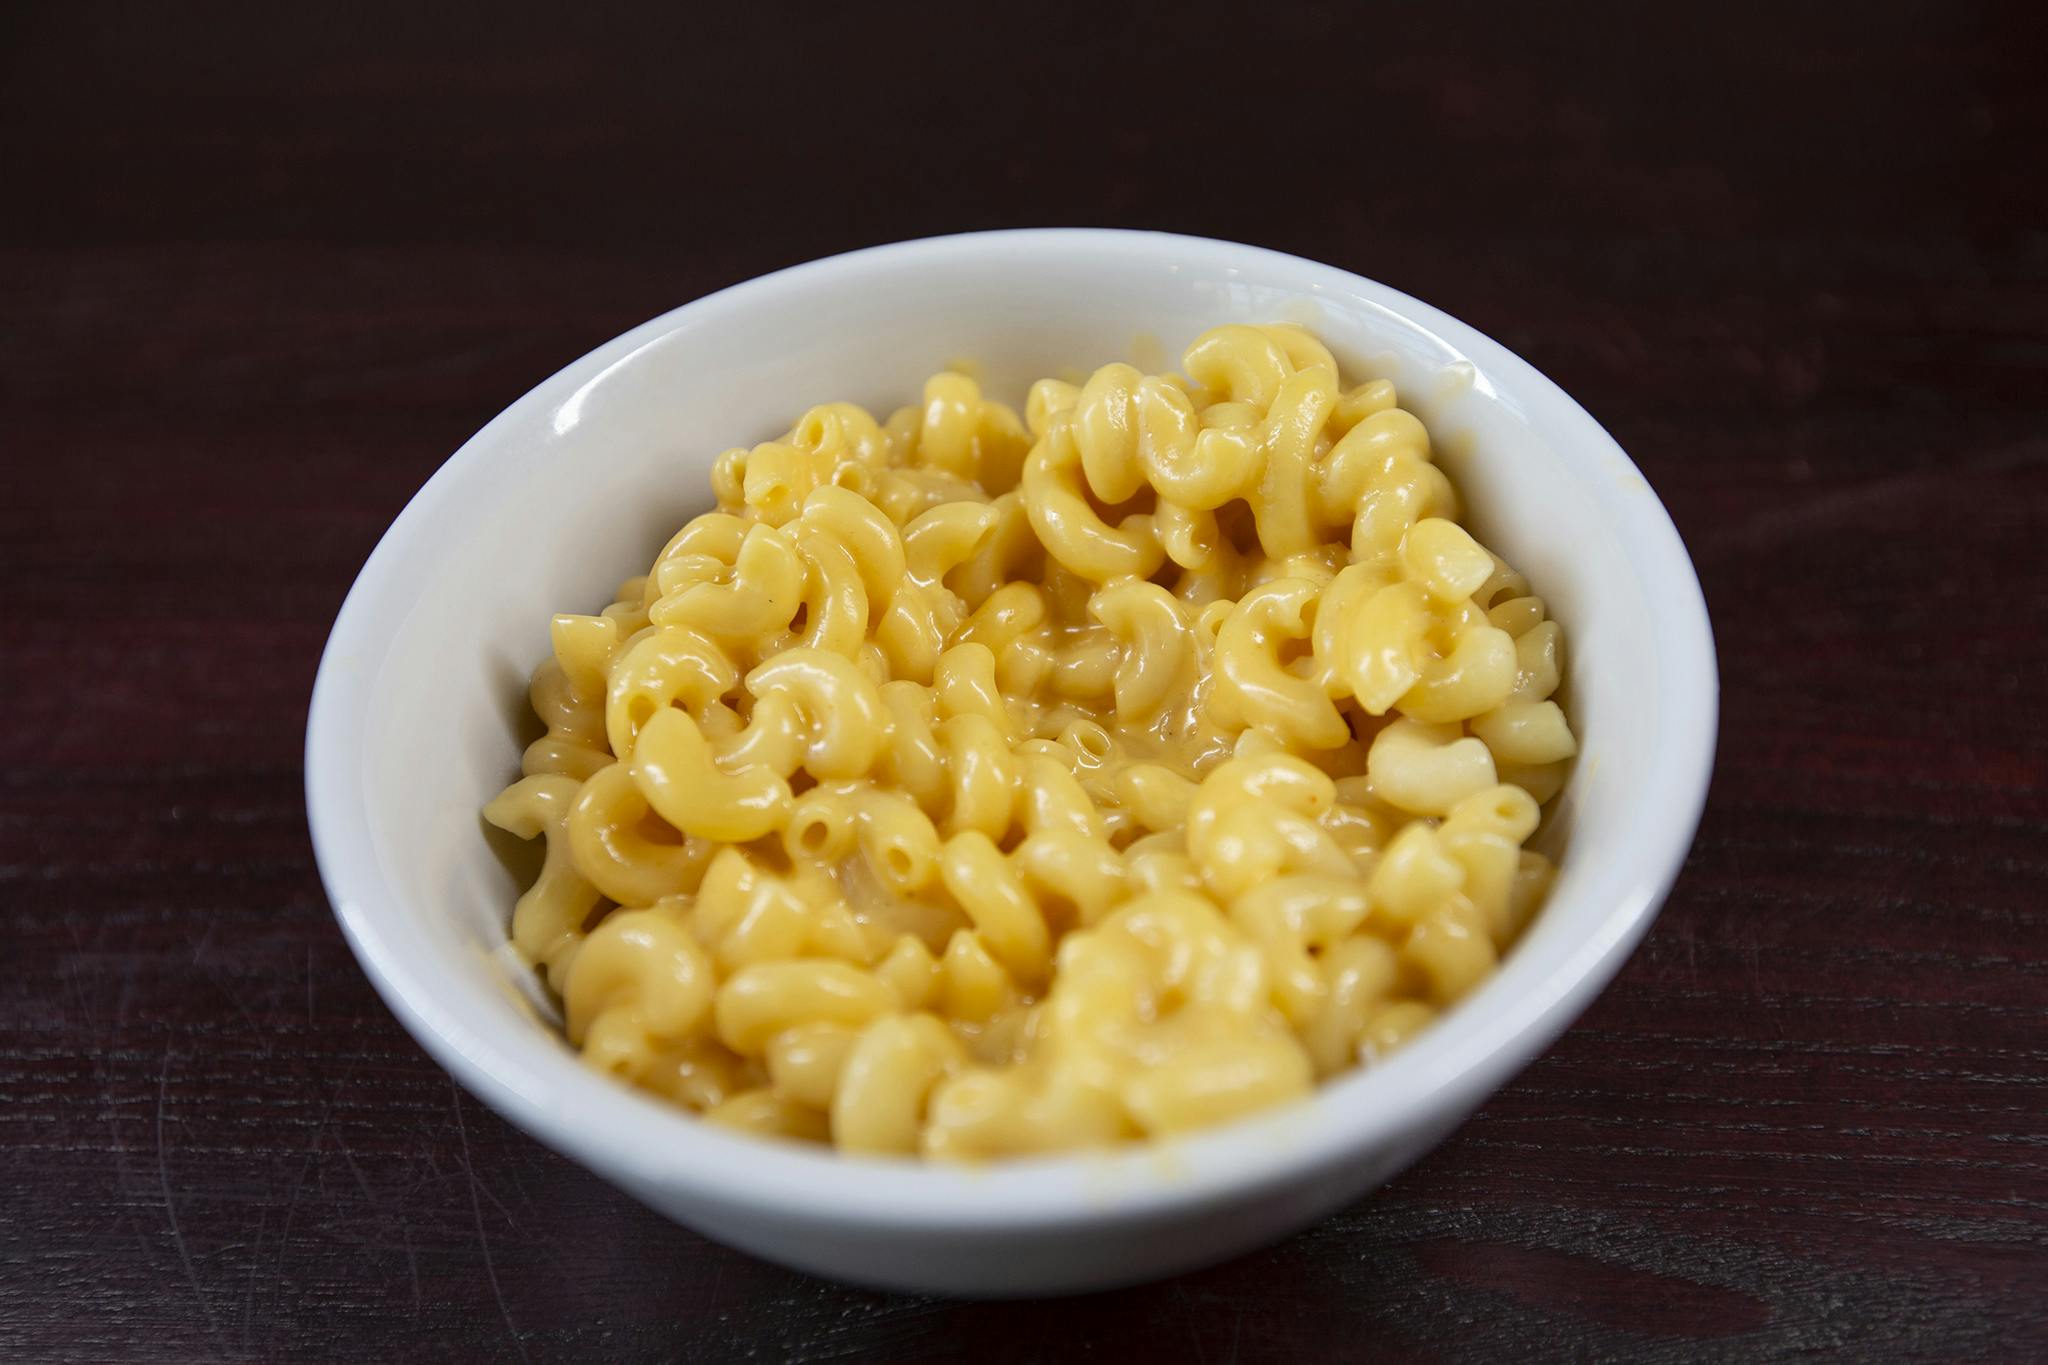 Mac and Cheese from Firehouse Grill - Chicago Ave in Evanston, IL